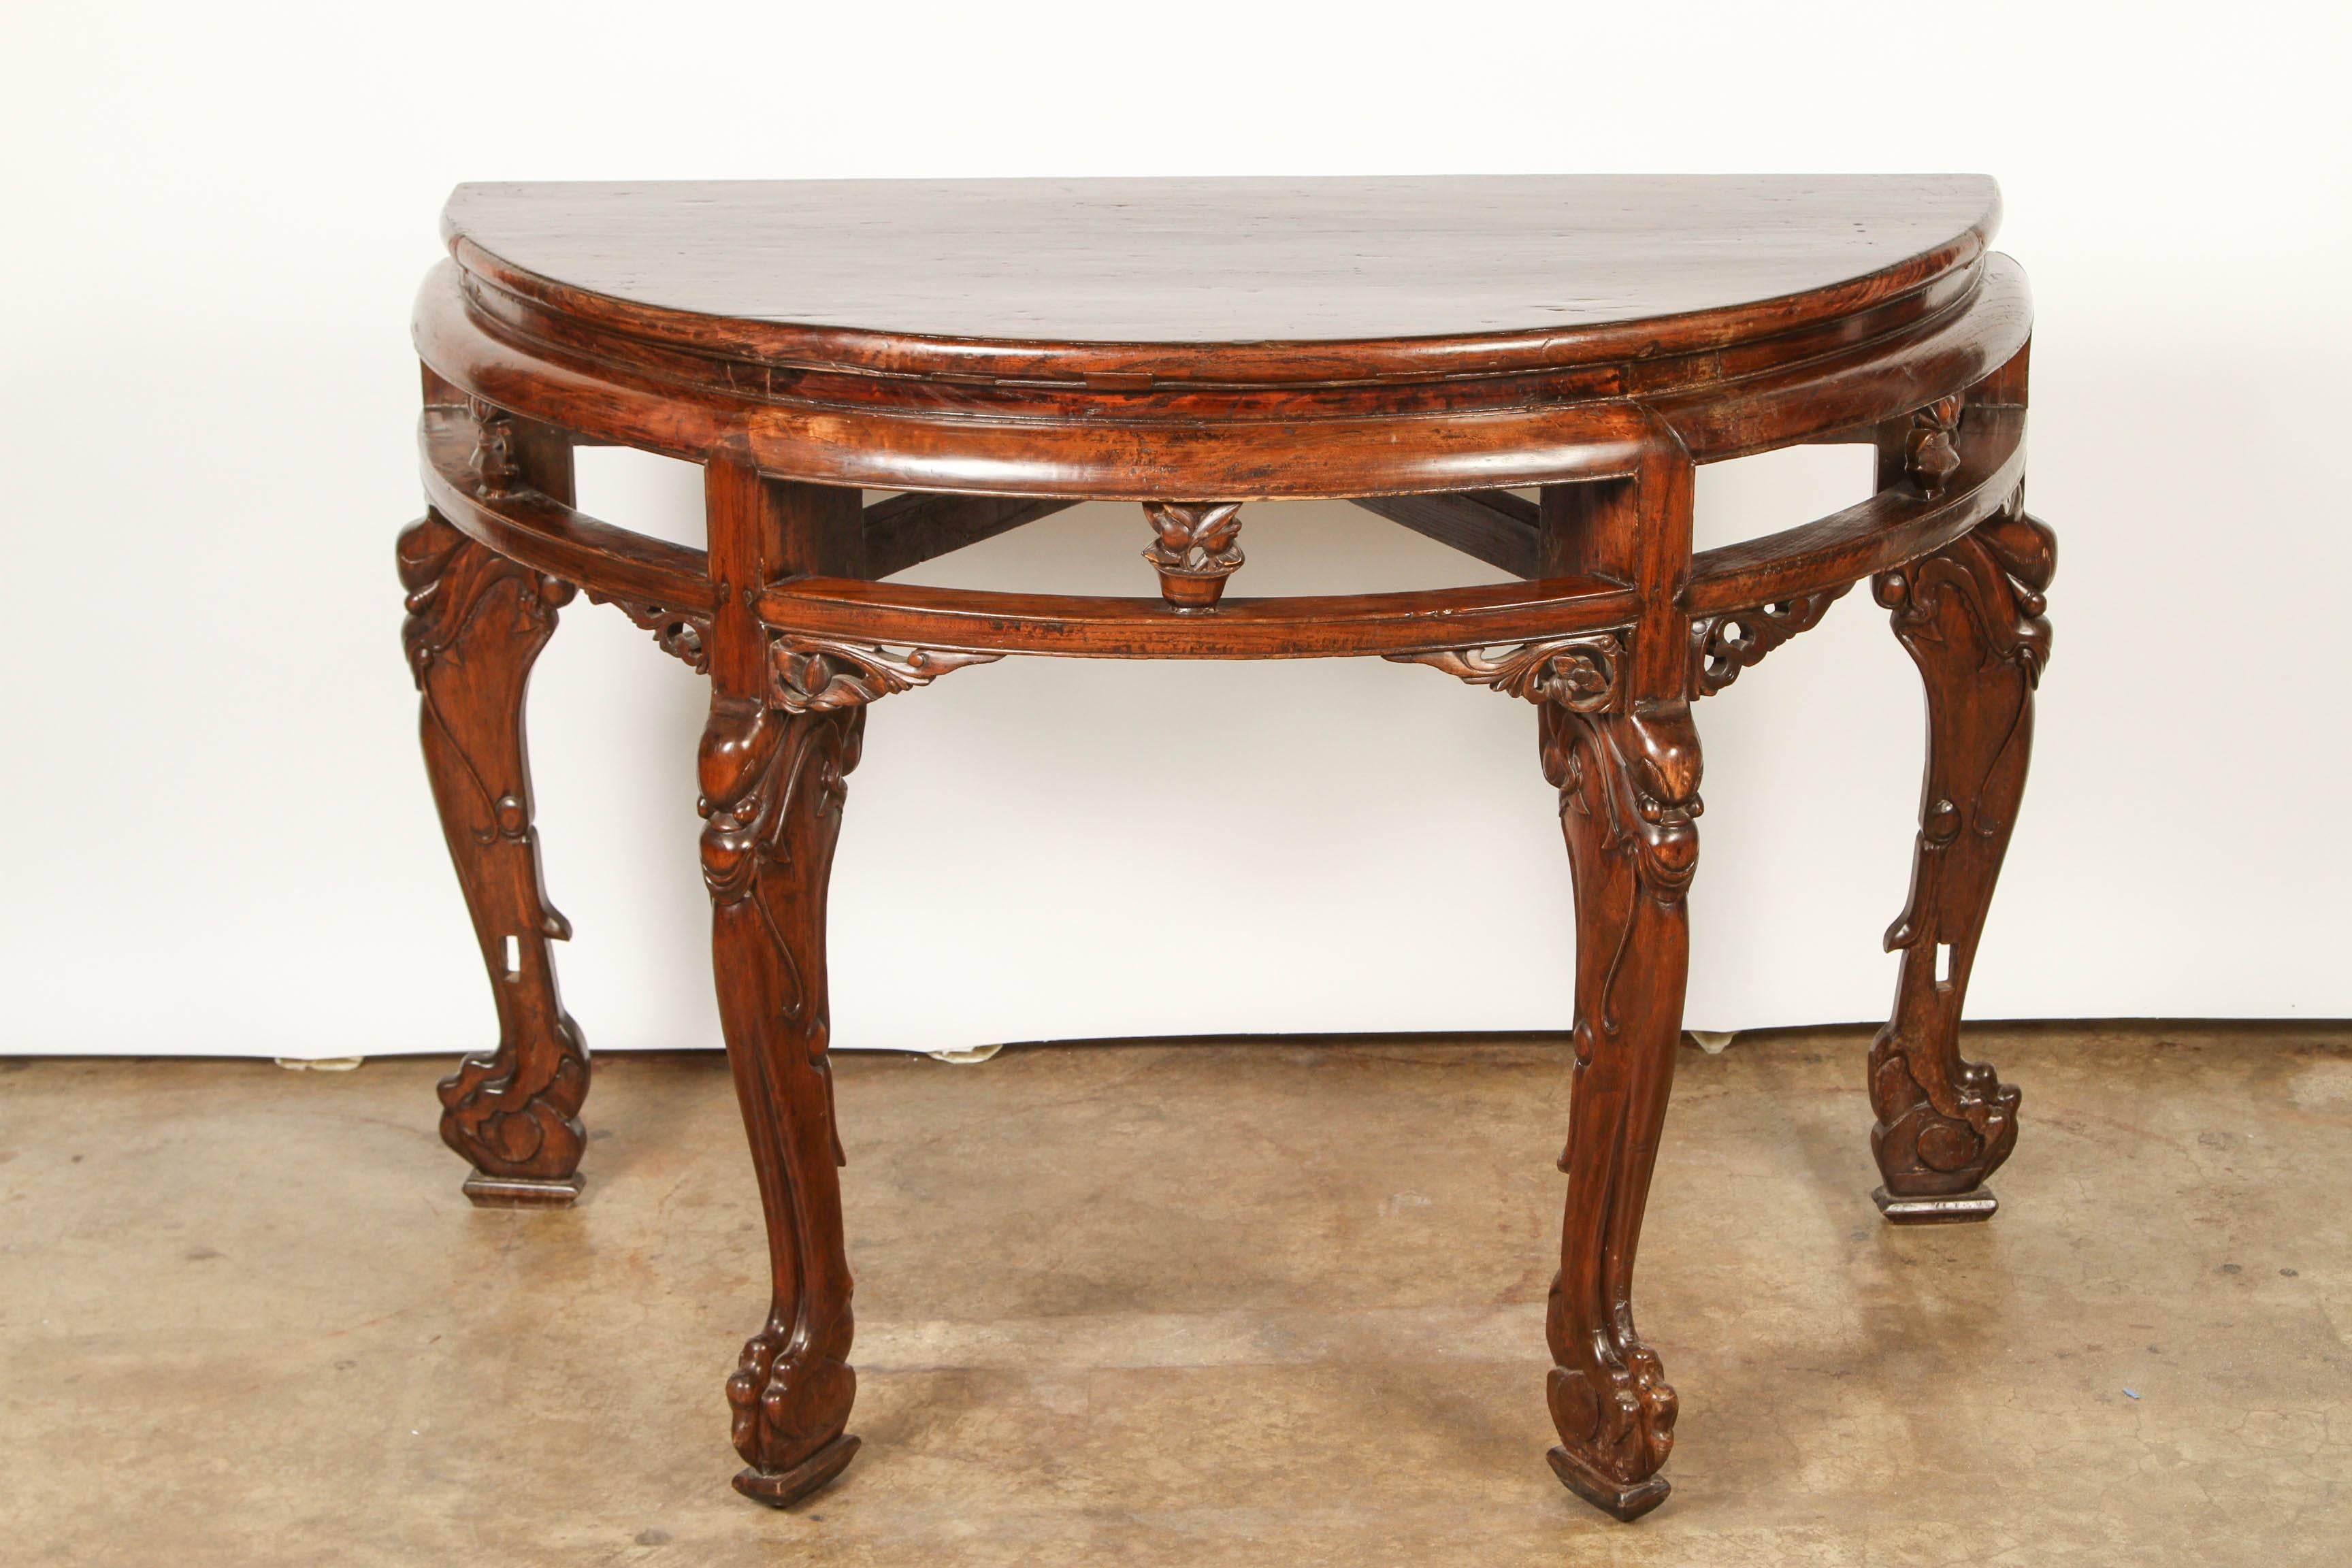 A pair of handsome Chinese demilunes. They can be placed back-to-back to create a single center table. They have carved legs that depict dragon faces and legs.